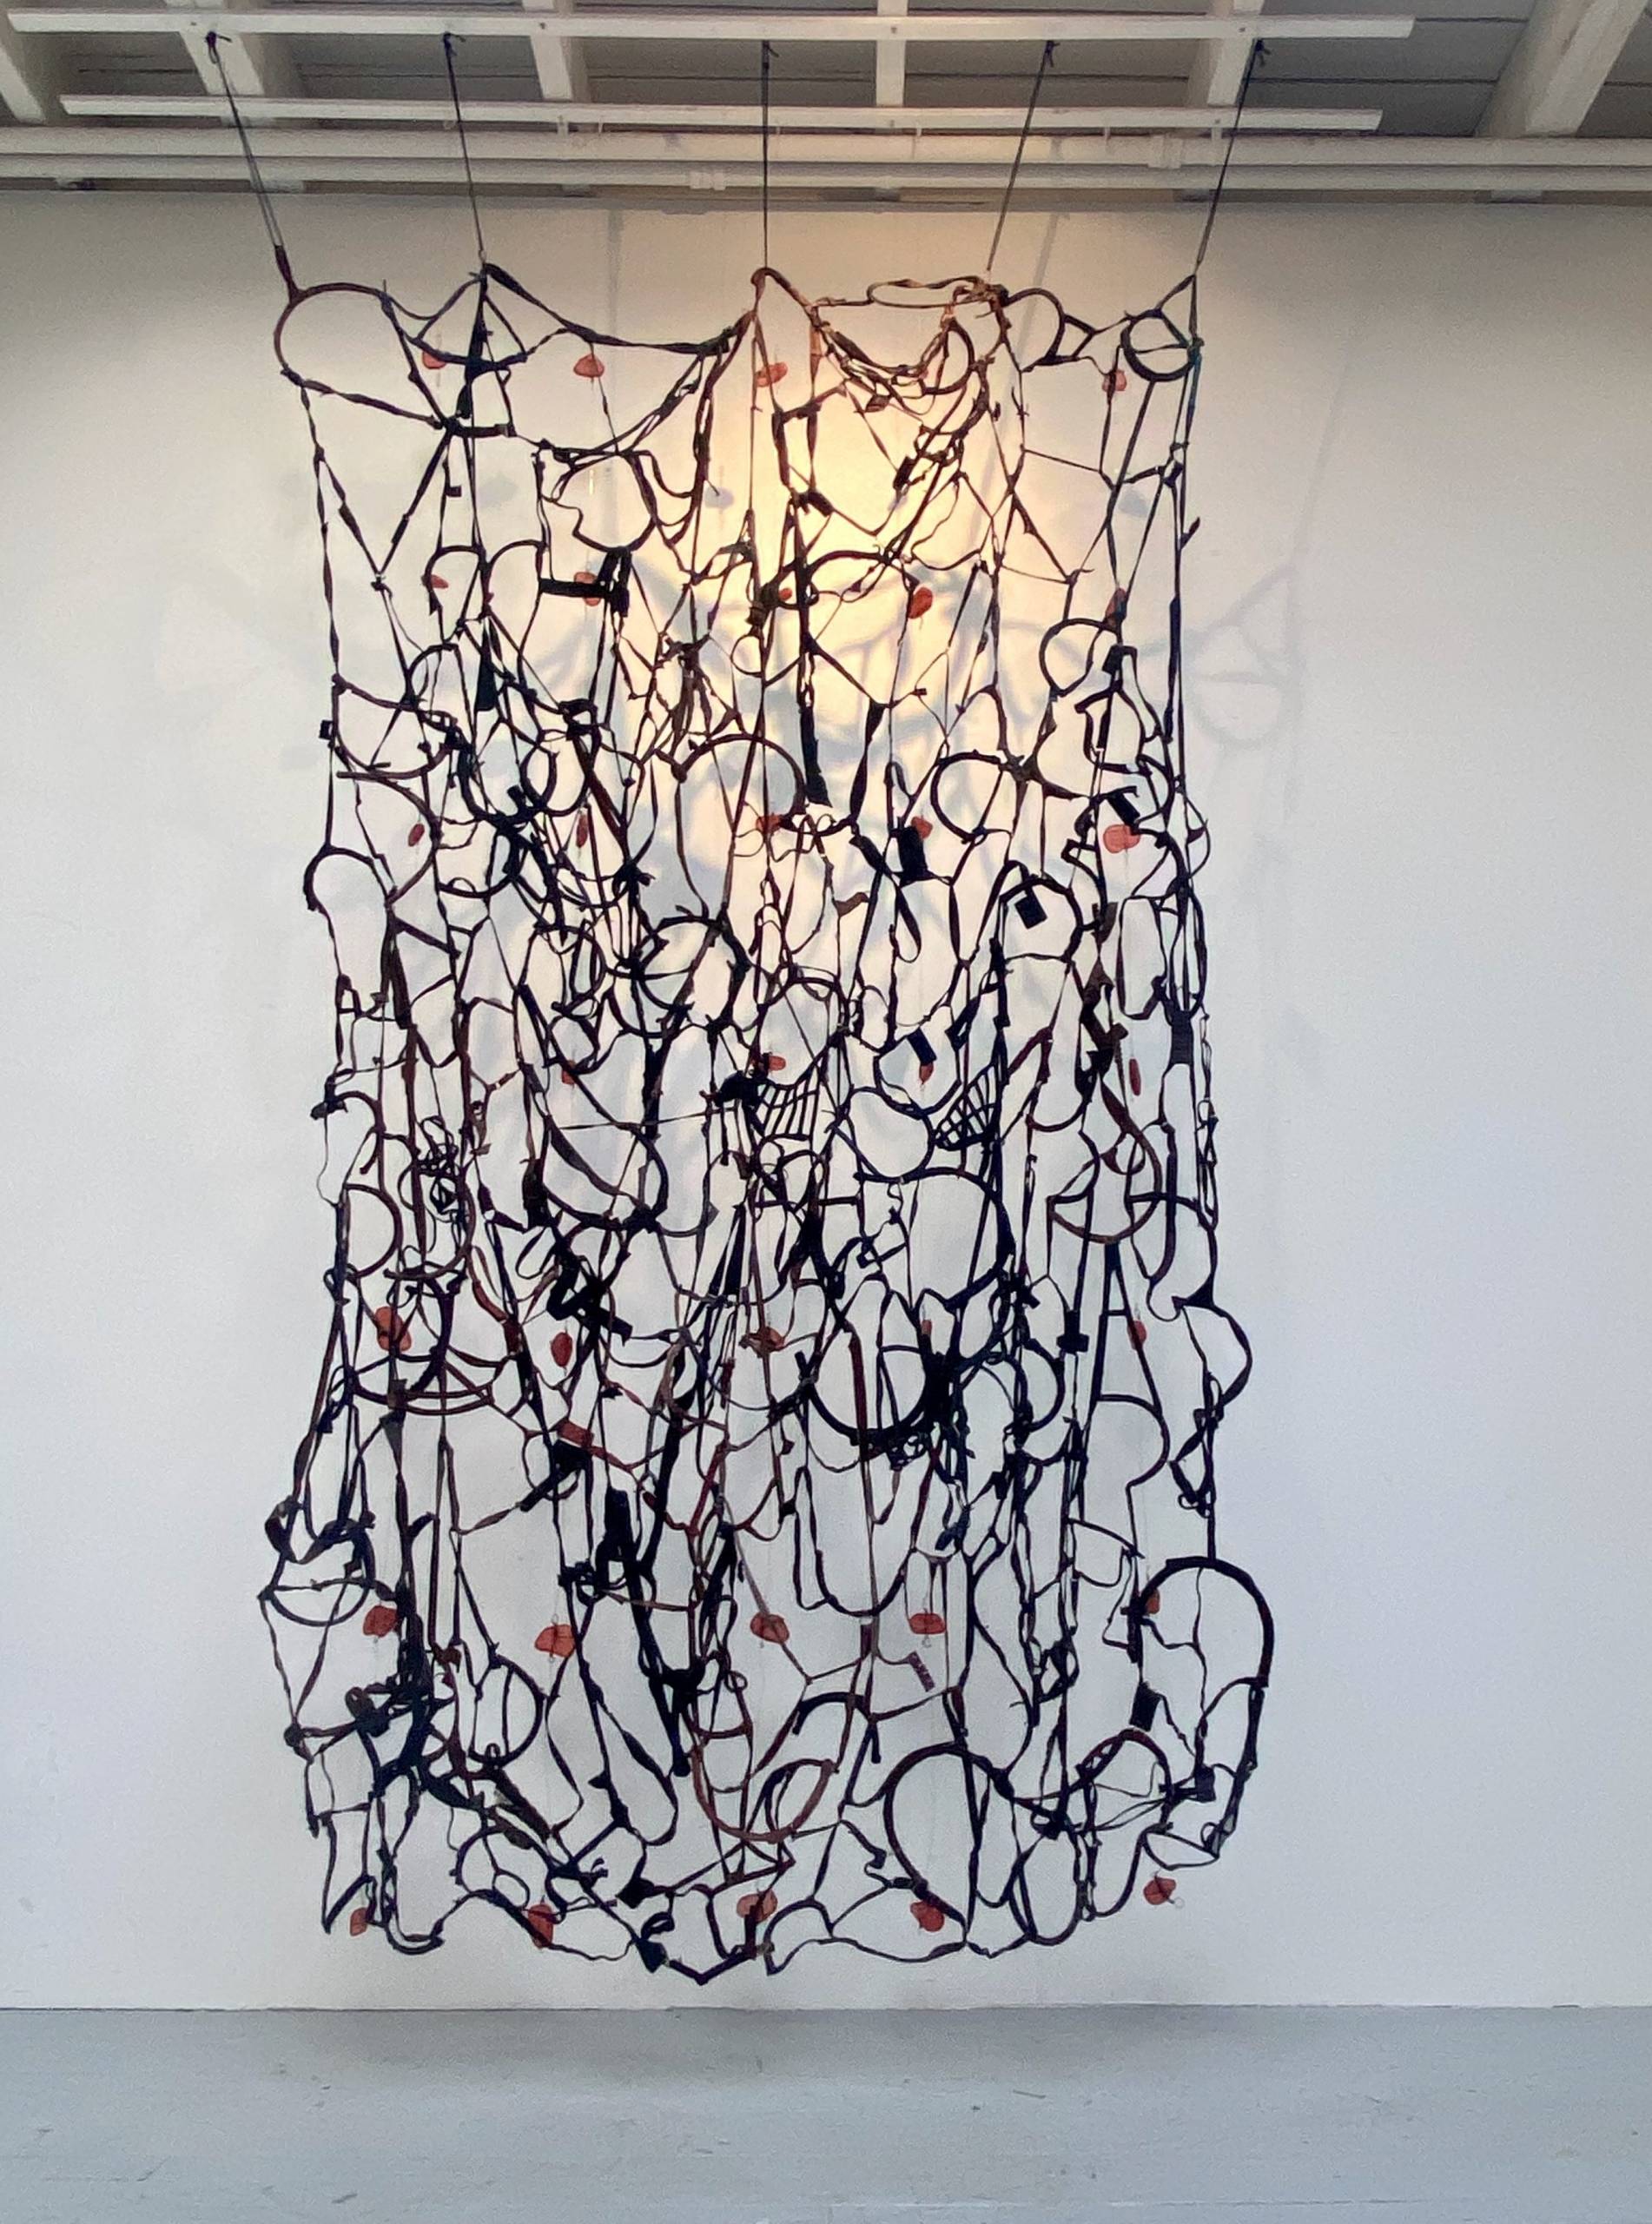 Hanging sculpture made from bras cut apart and strung together